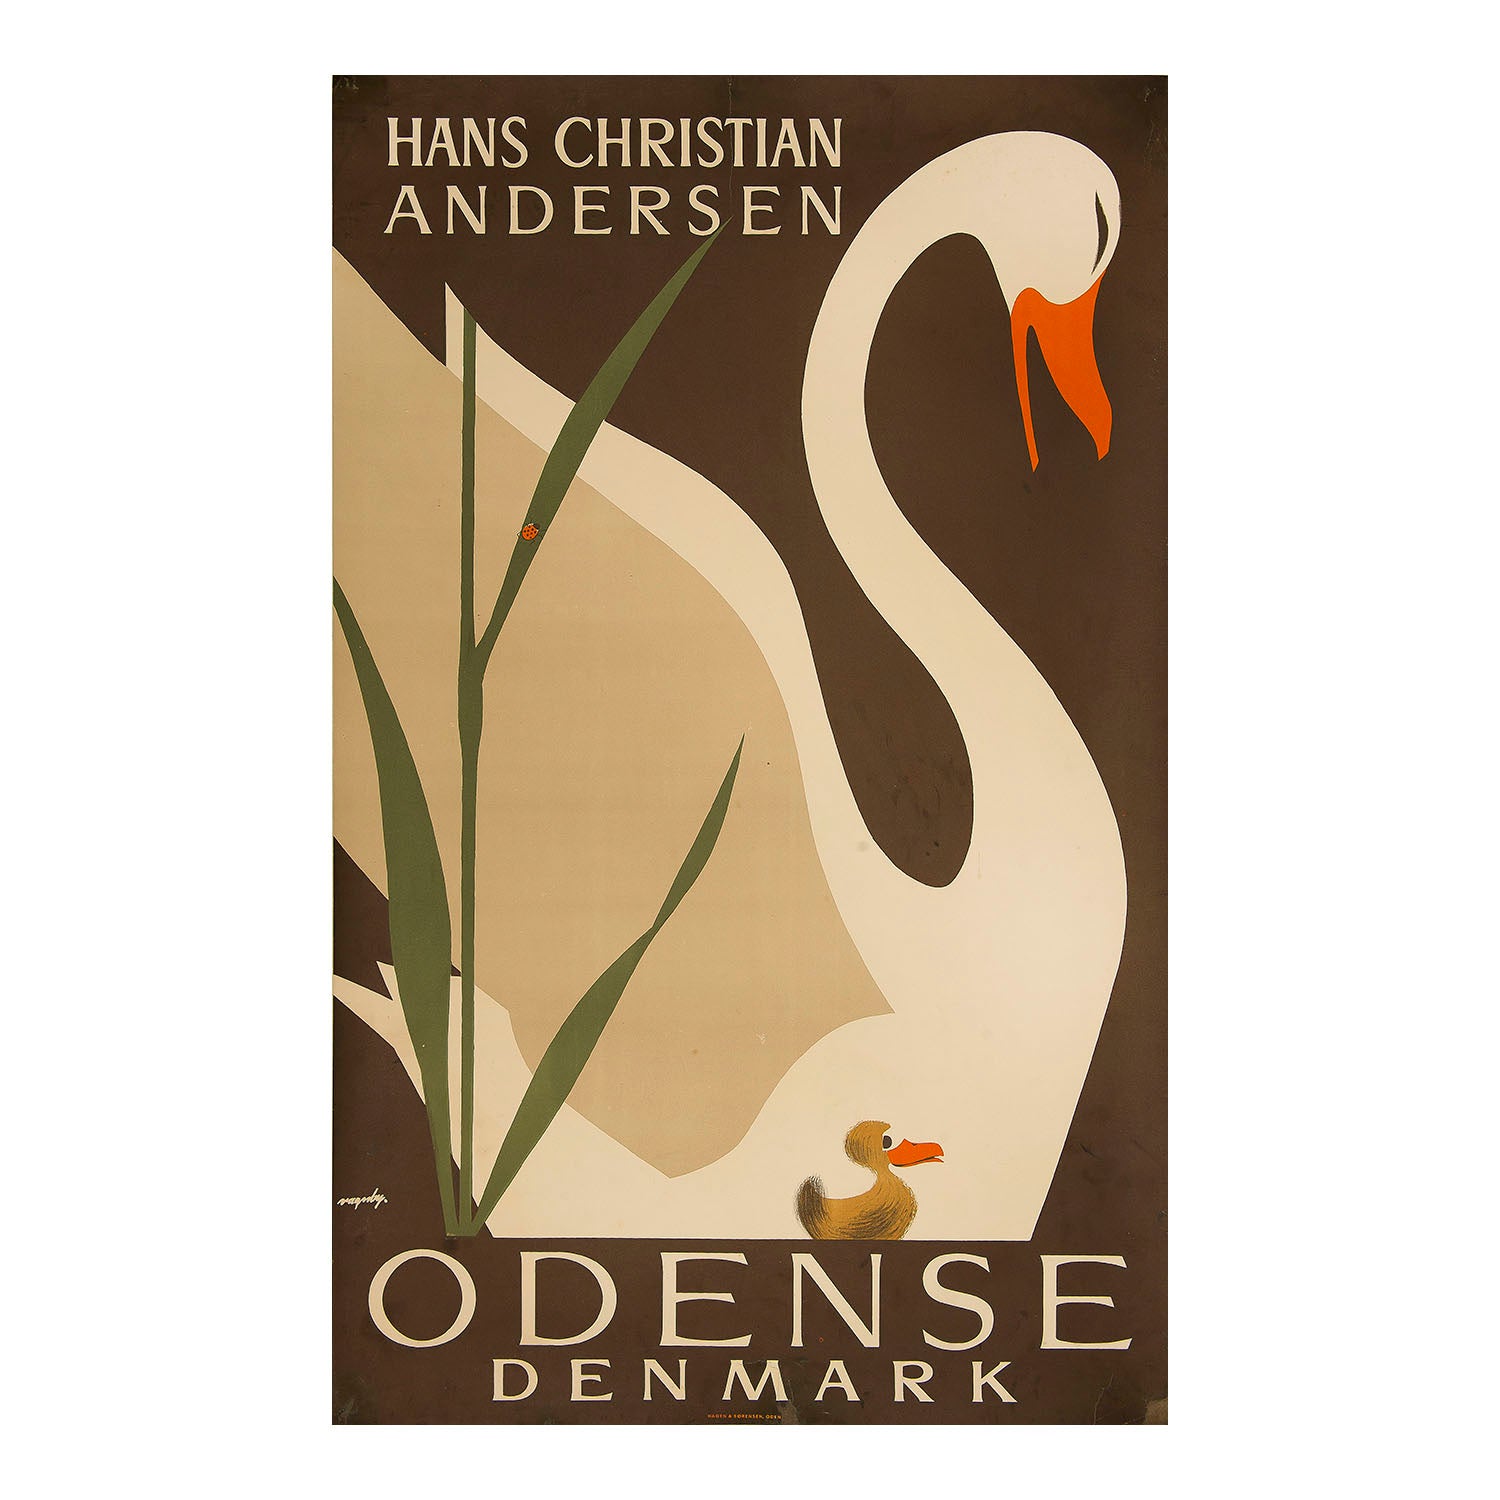 An original Danish tourism poster for Odense, c. 1960. The design by Viggo Vagnby features “The Ugly Duckling” next to an imposing white swan, from the famous Hans Andersen fairy tale of the same name.